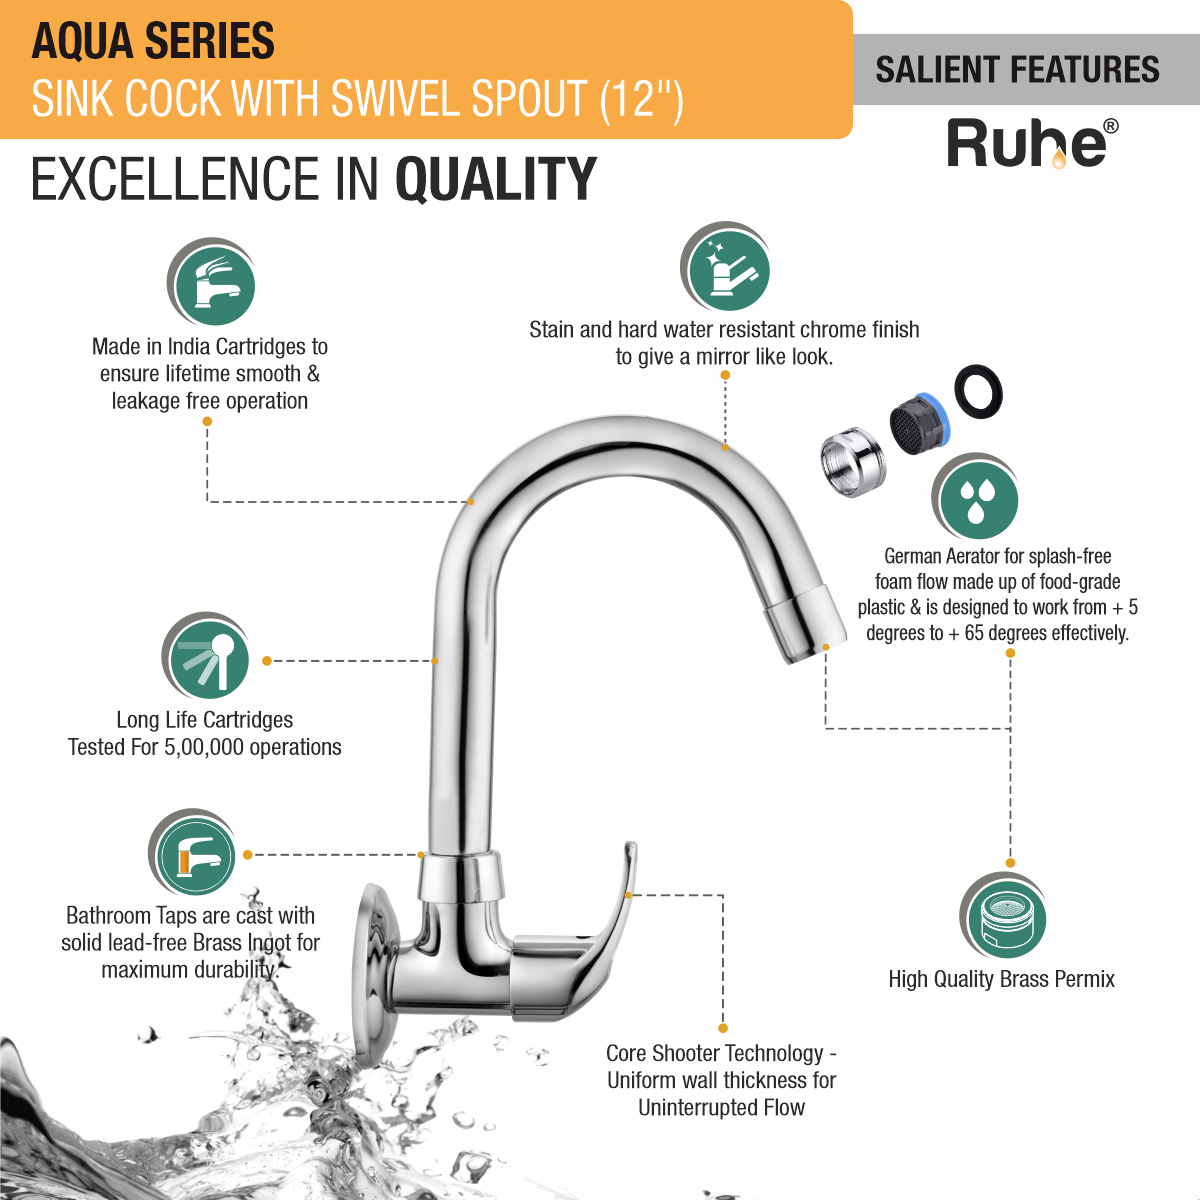 Aqua Sink Tap with Small (12 inches) Round Swivel Spout Faucet features